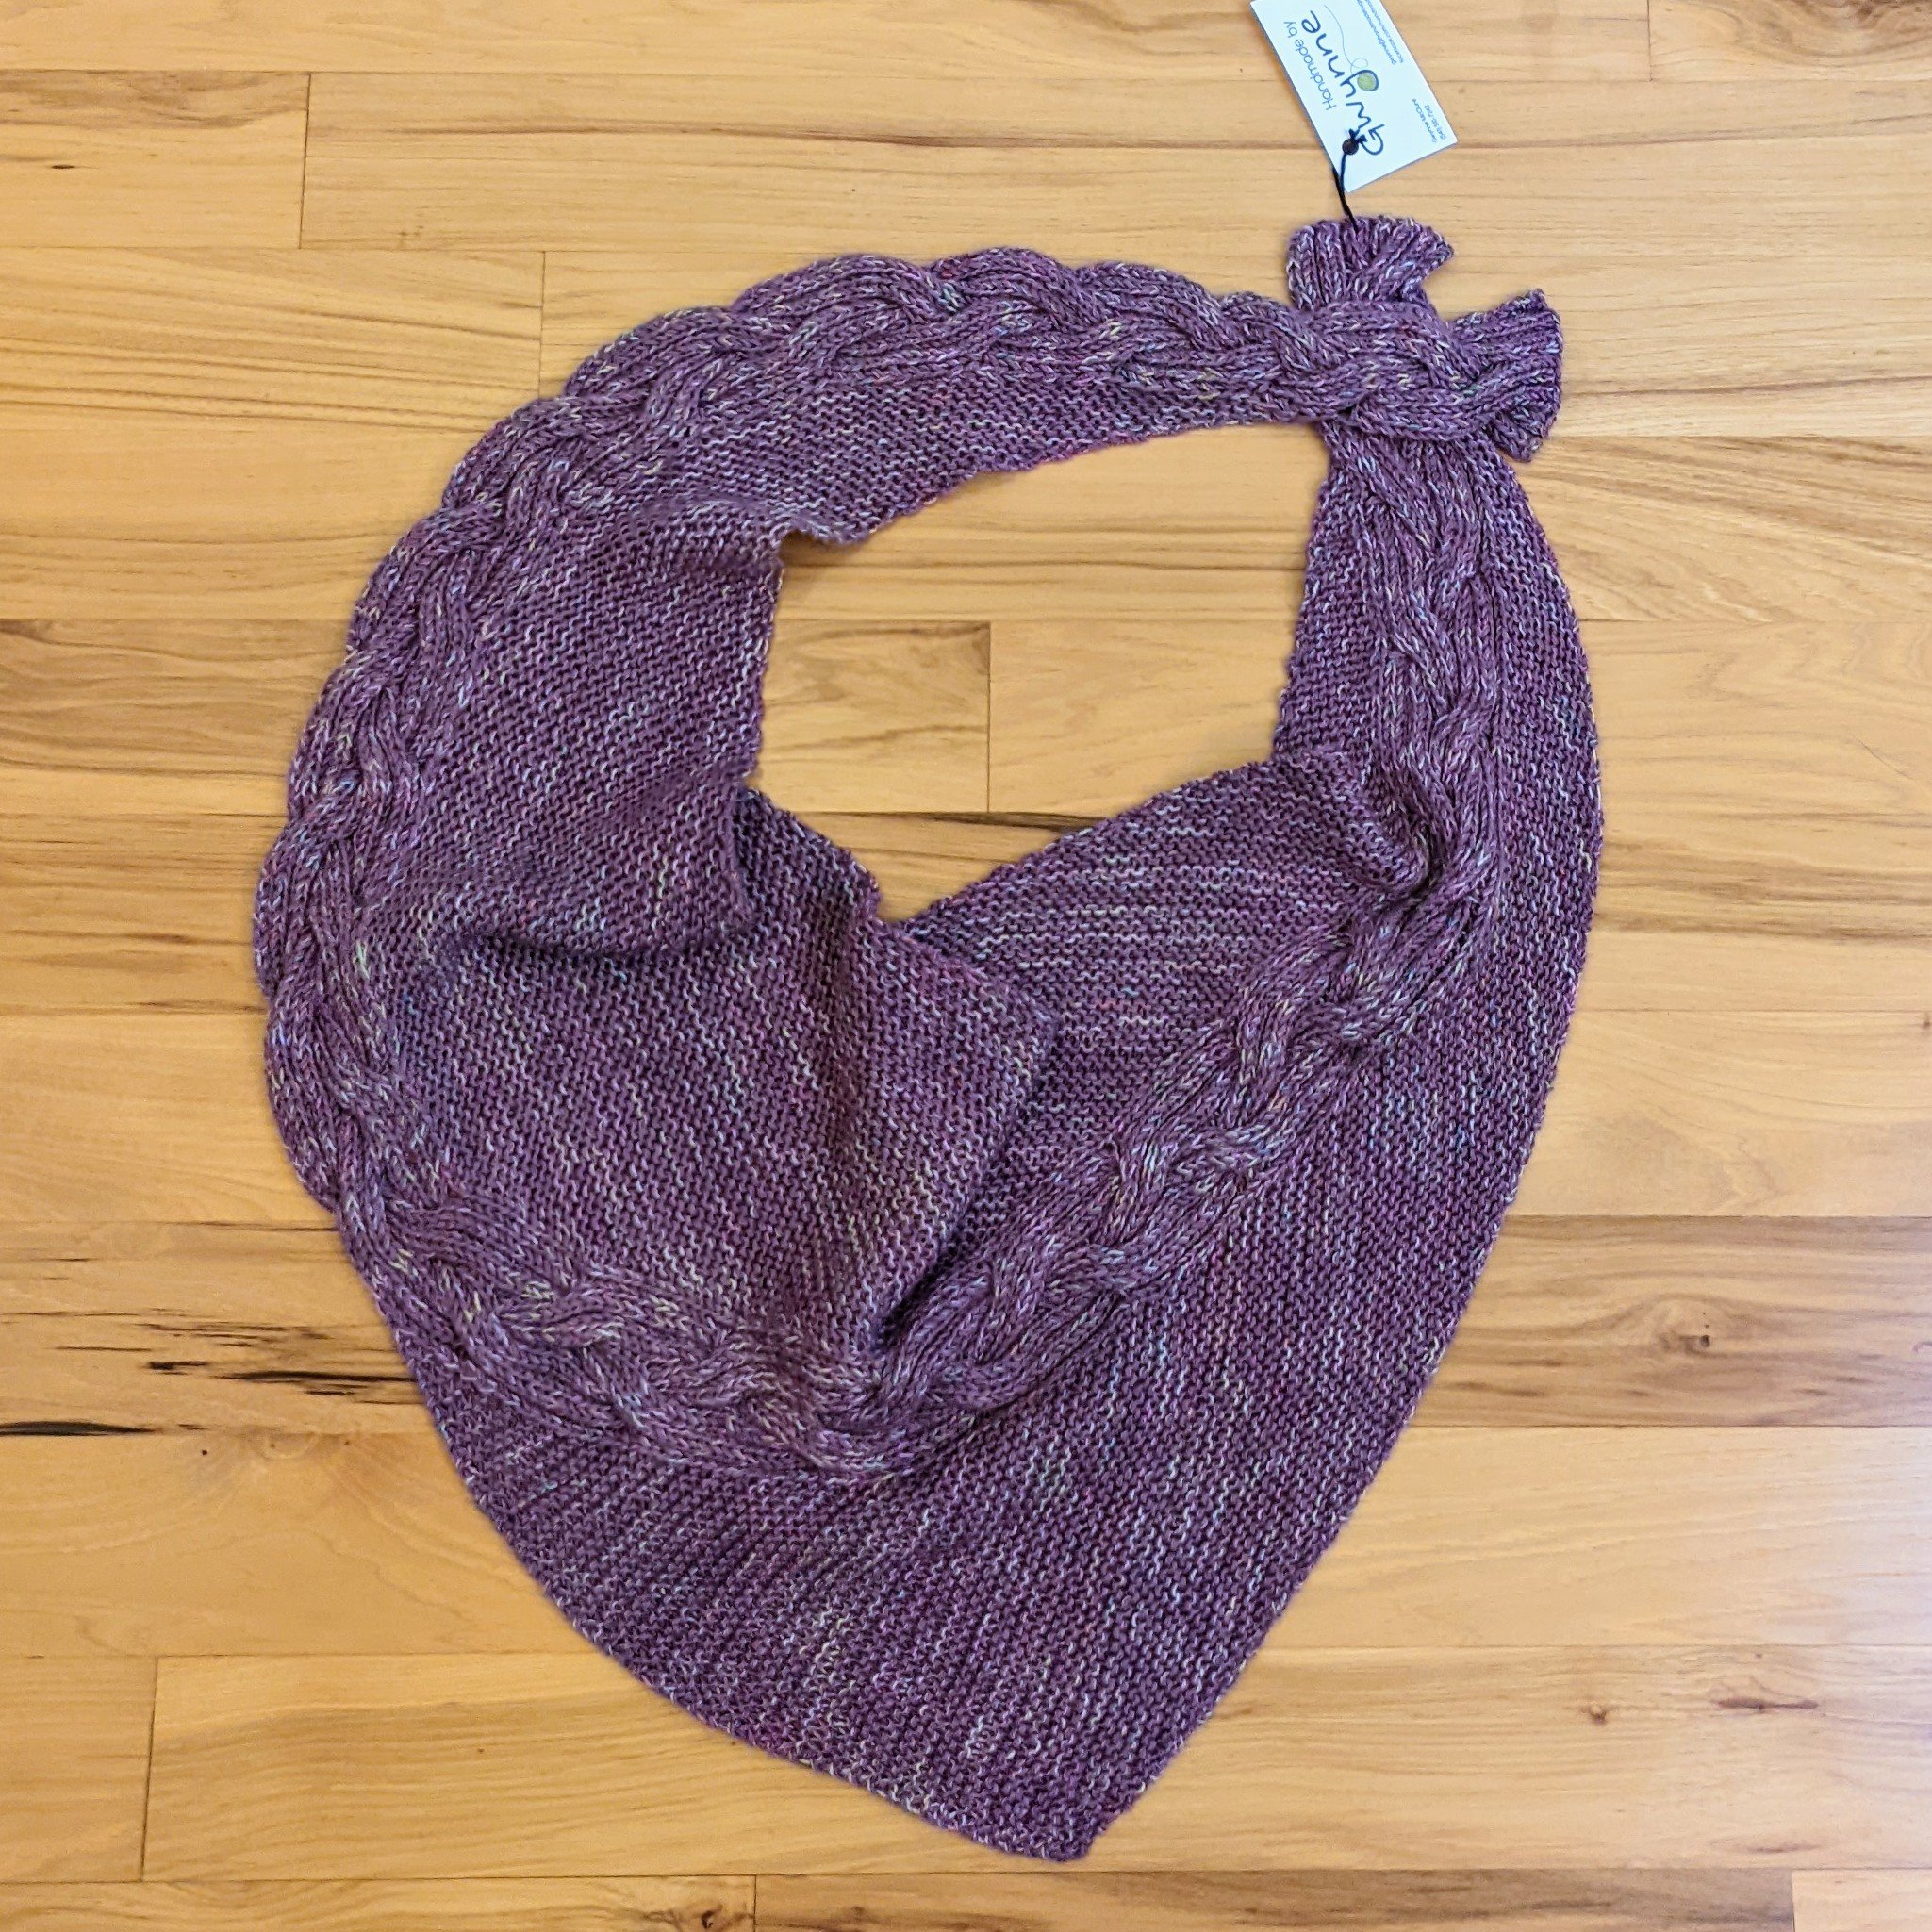 Dusky Lavender with Variegated Pale Blue-Green Yarn Reversible Cable Scarf/ Shawl – Handmade by Gwynne